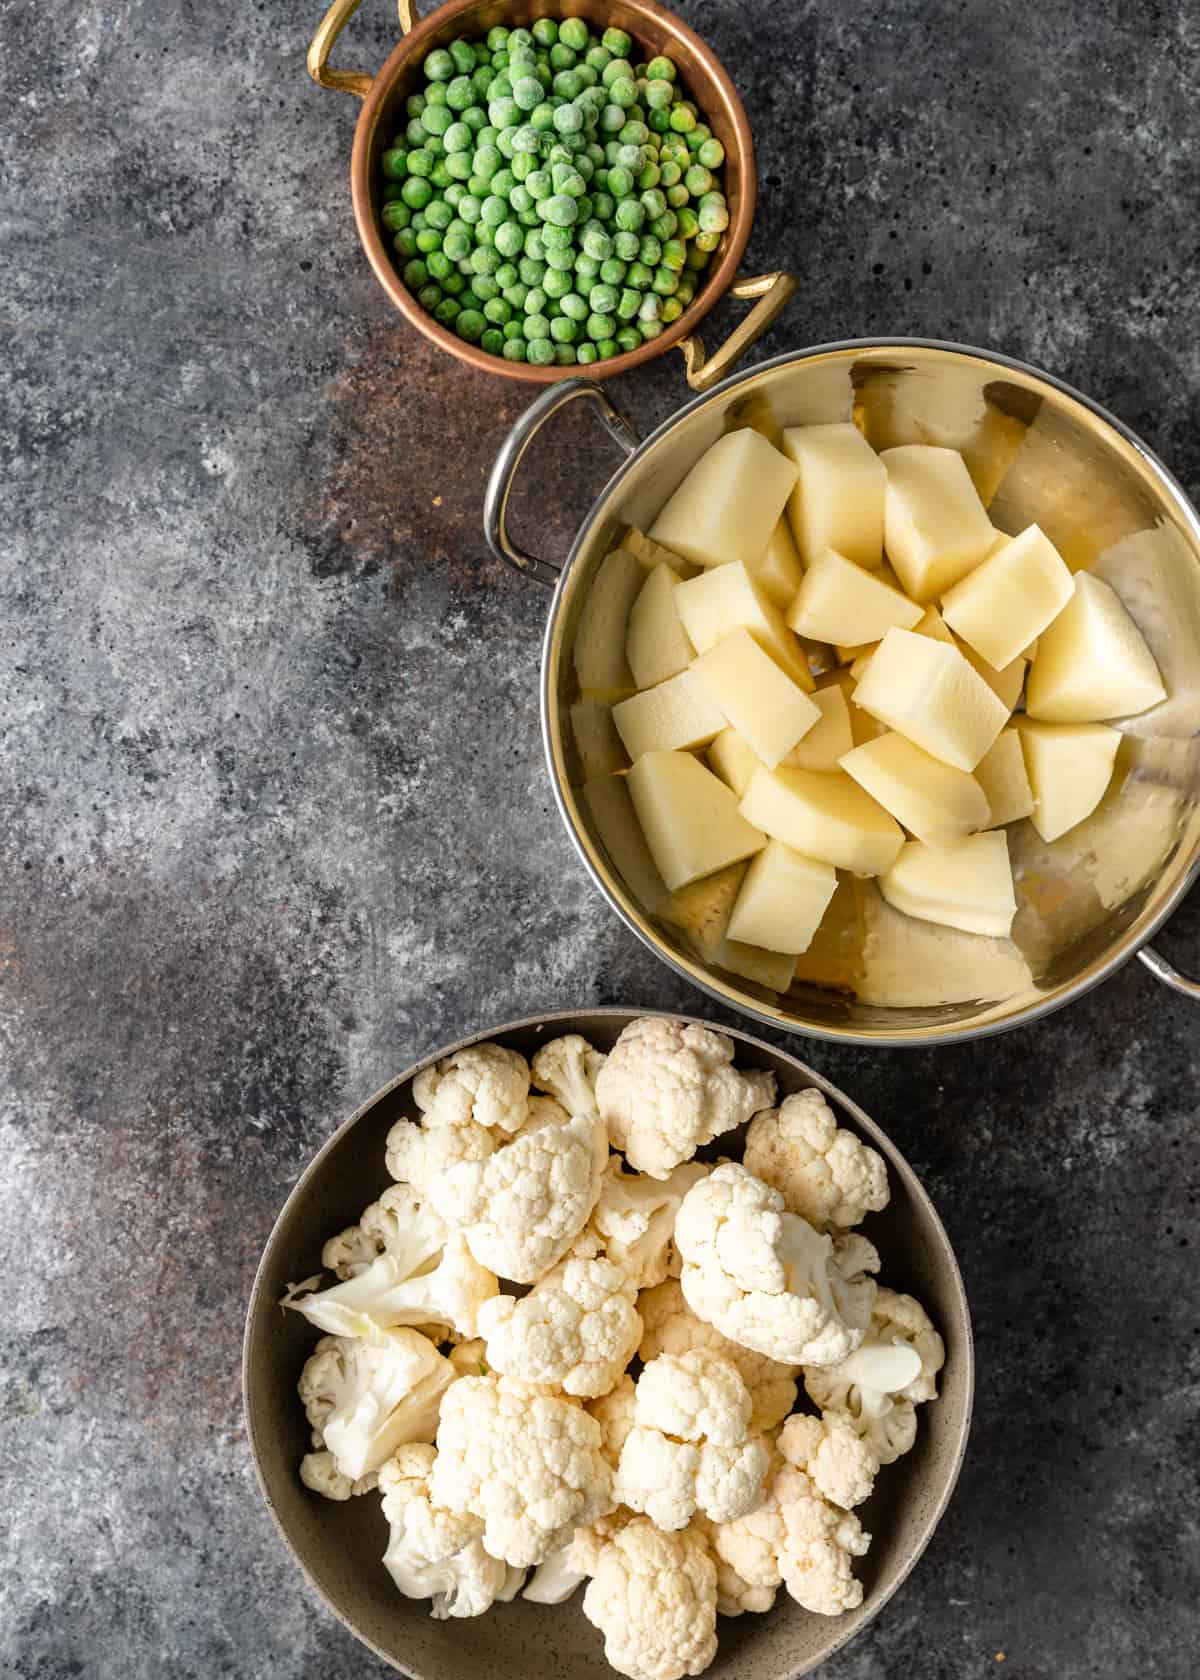 potatoes, cauliflower, and peas in bowls